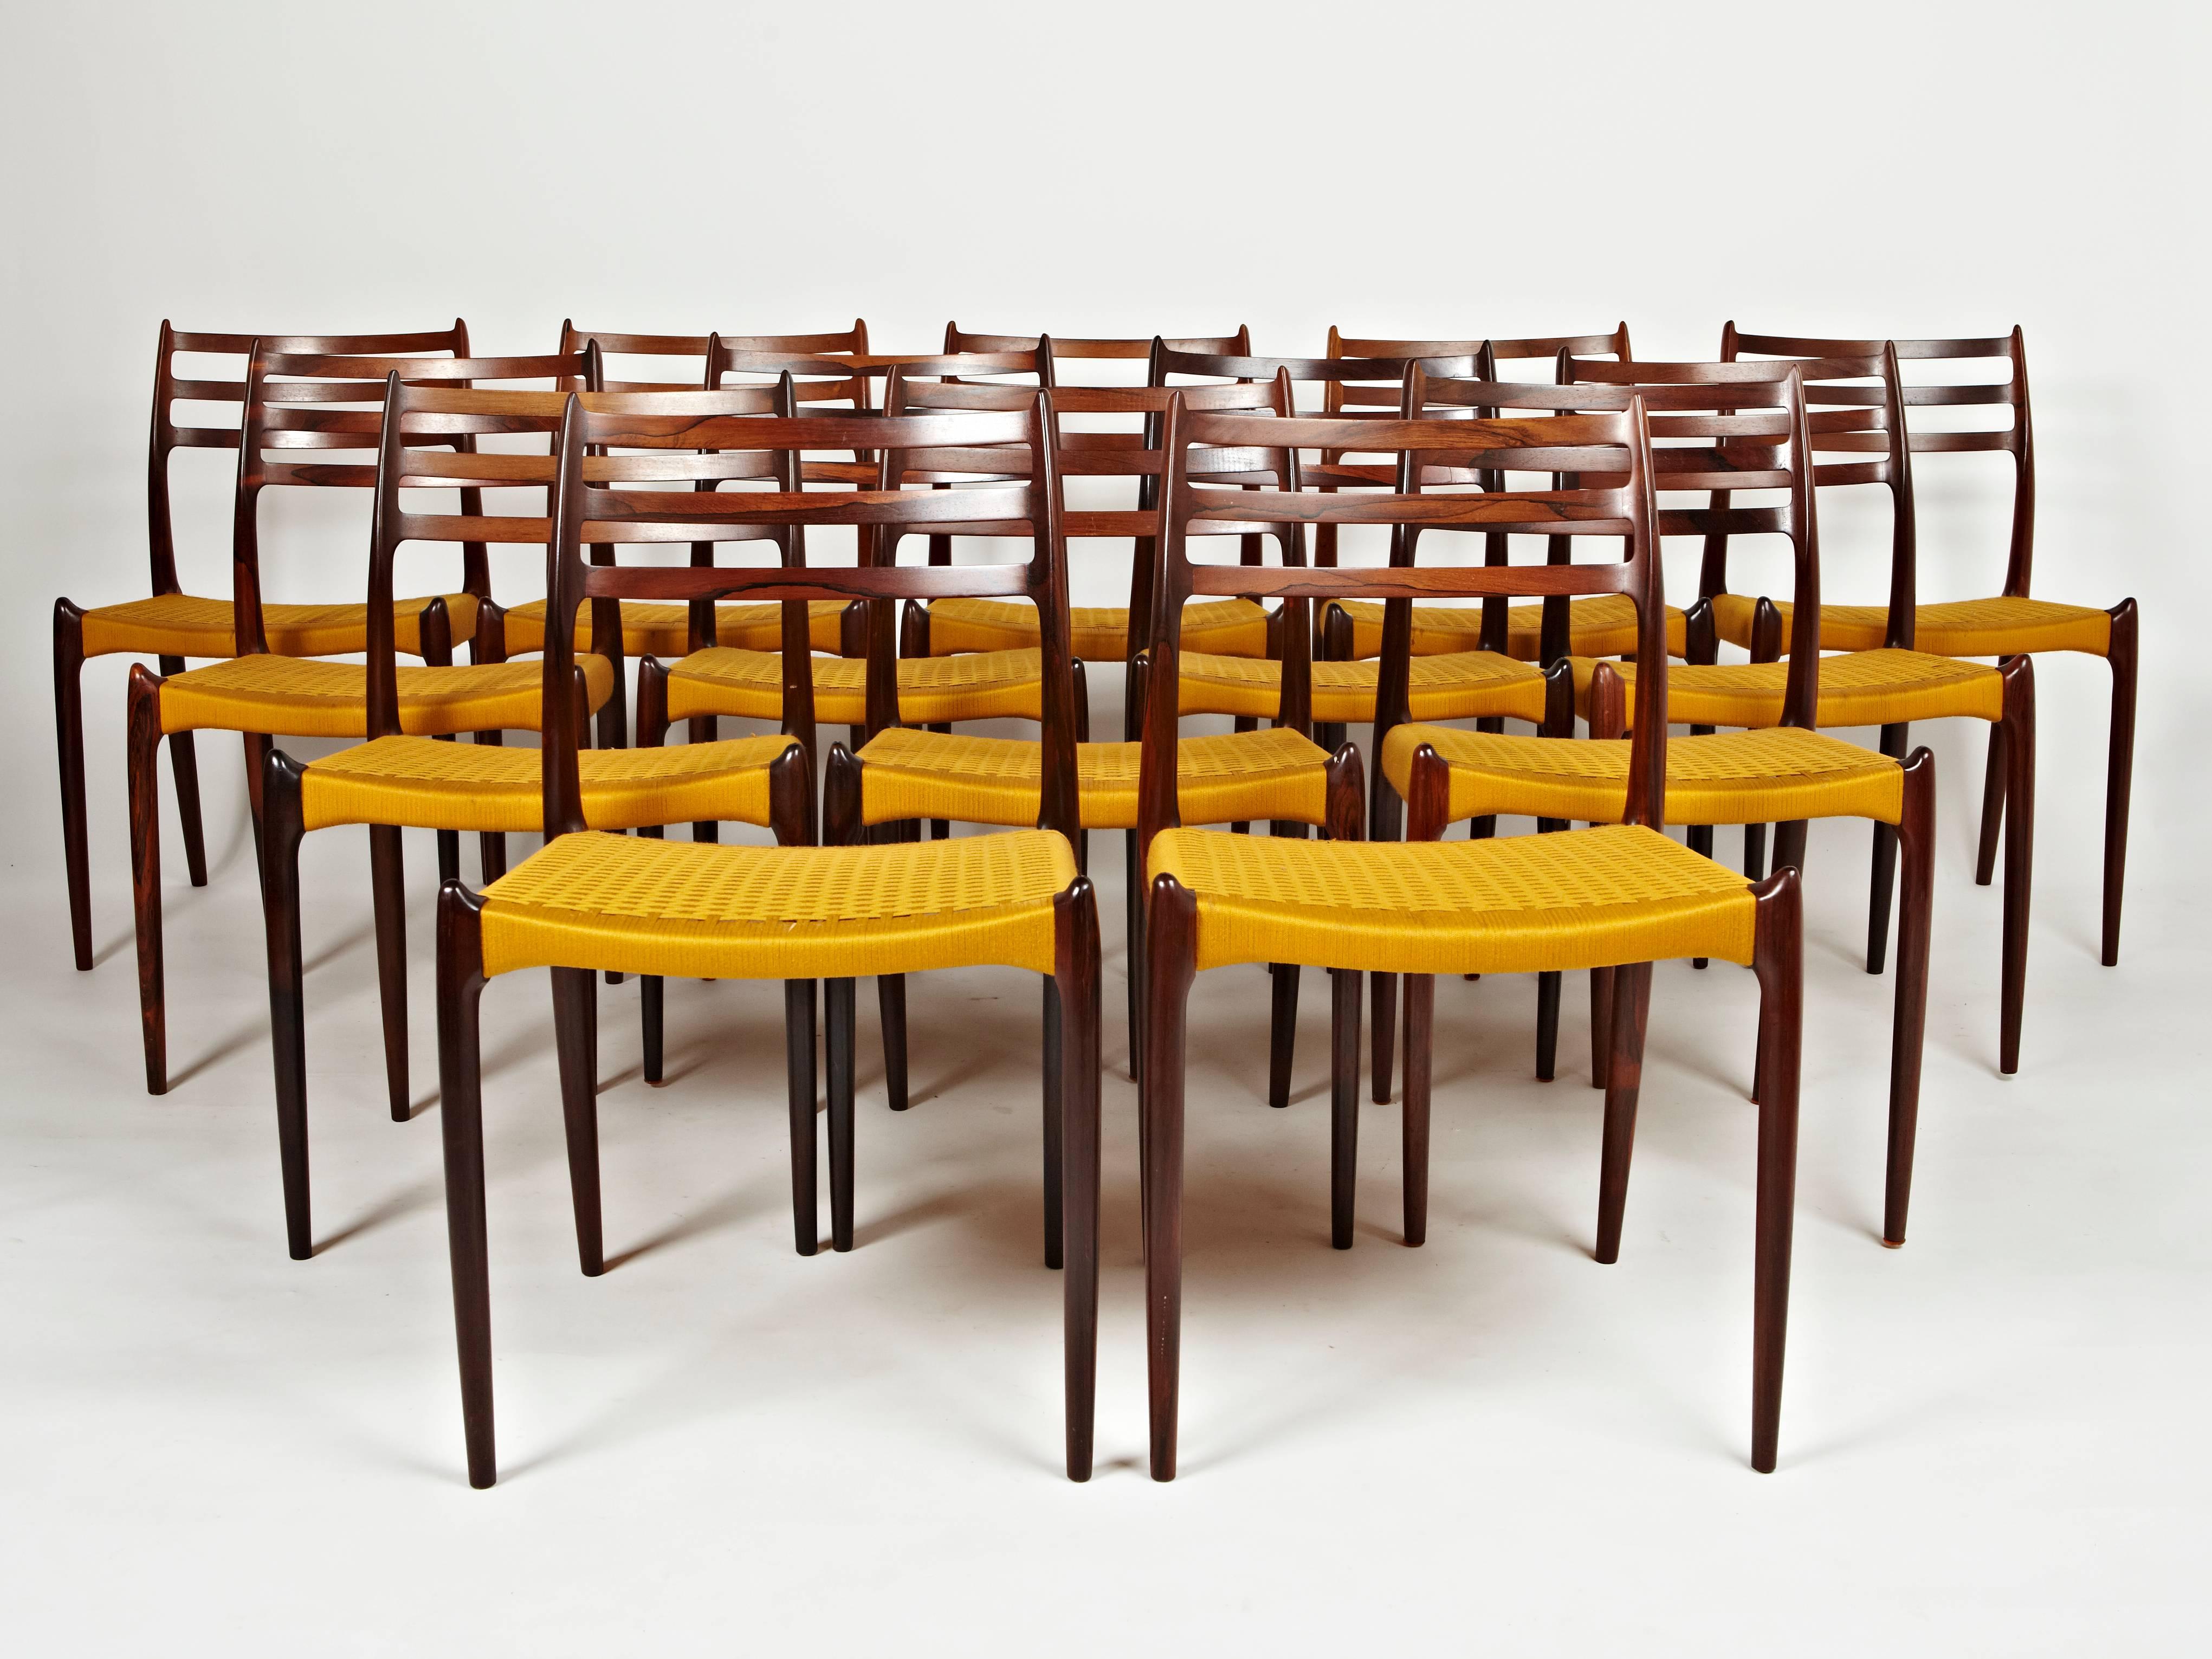 This group of 16 rosewood dining chairs (14 chairs pictured) designed by Niels Otto Møller in 1962 and made and labelled by JL Moller before 1969 is truly unique. Each frame is made of rosewood with an amazing play of colors and black veining.